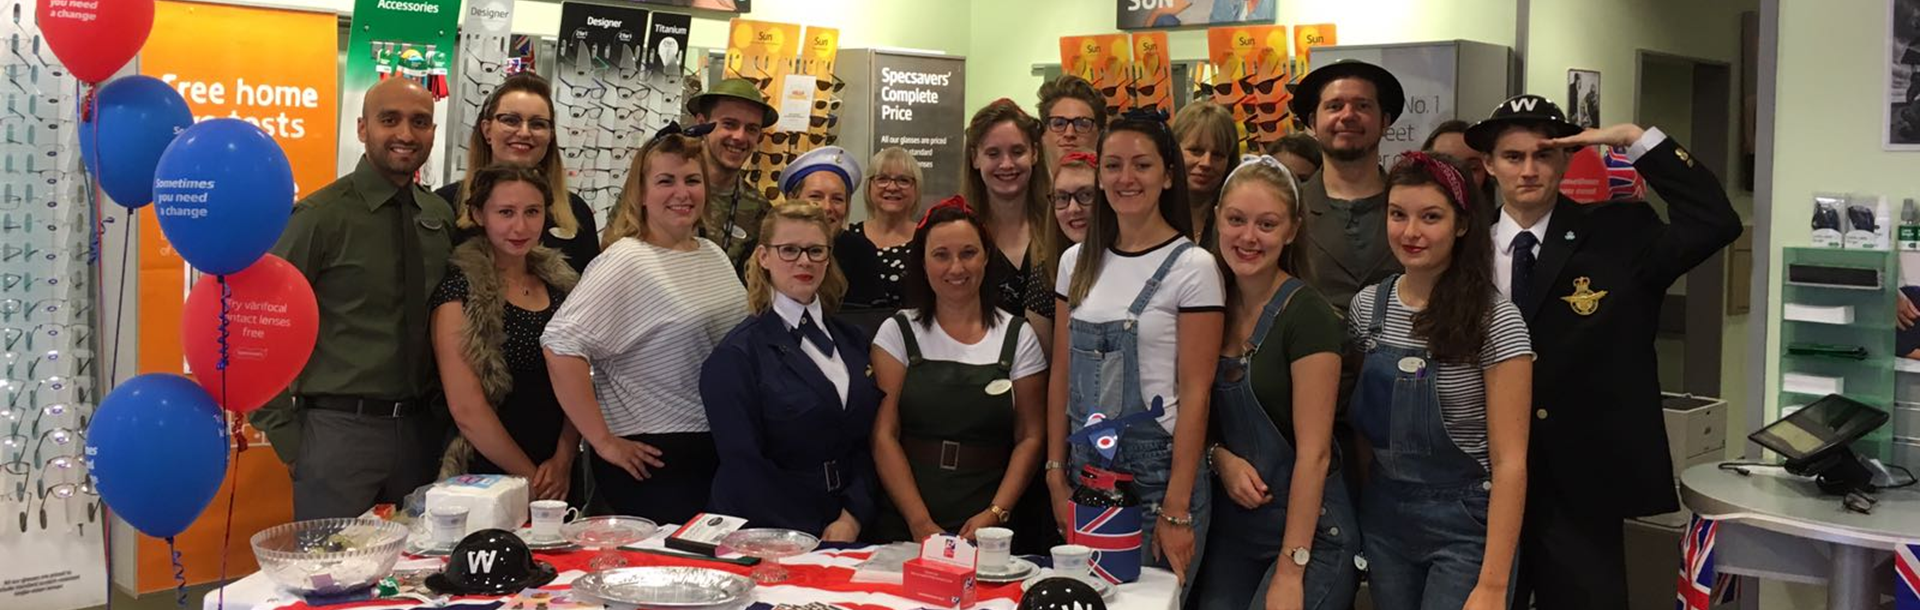  A group of staff members inside Specsavers huddled together wearing military fancy dress while fundraising